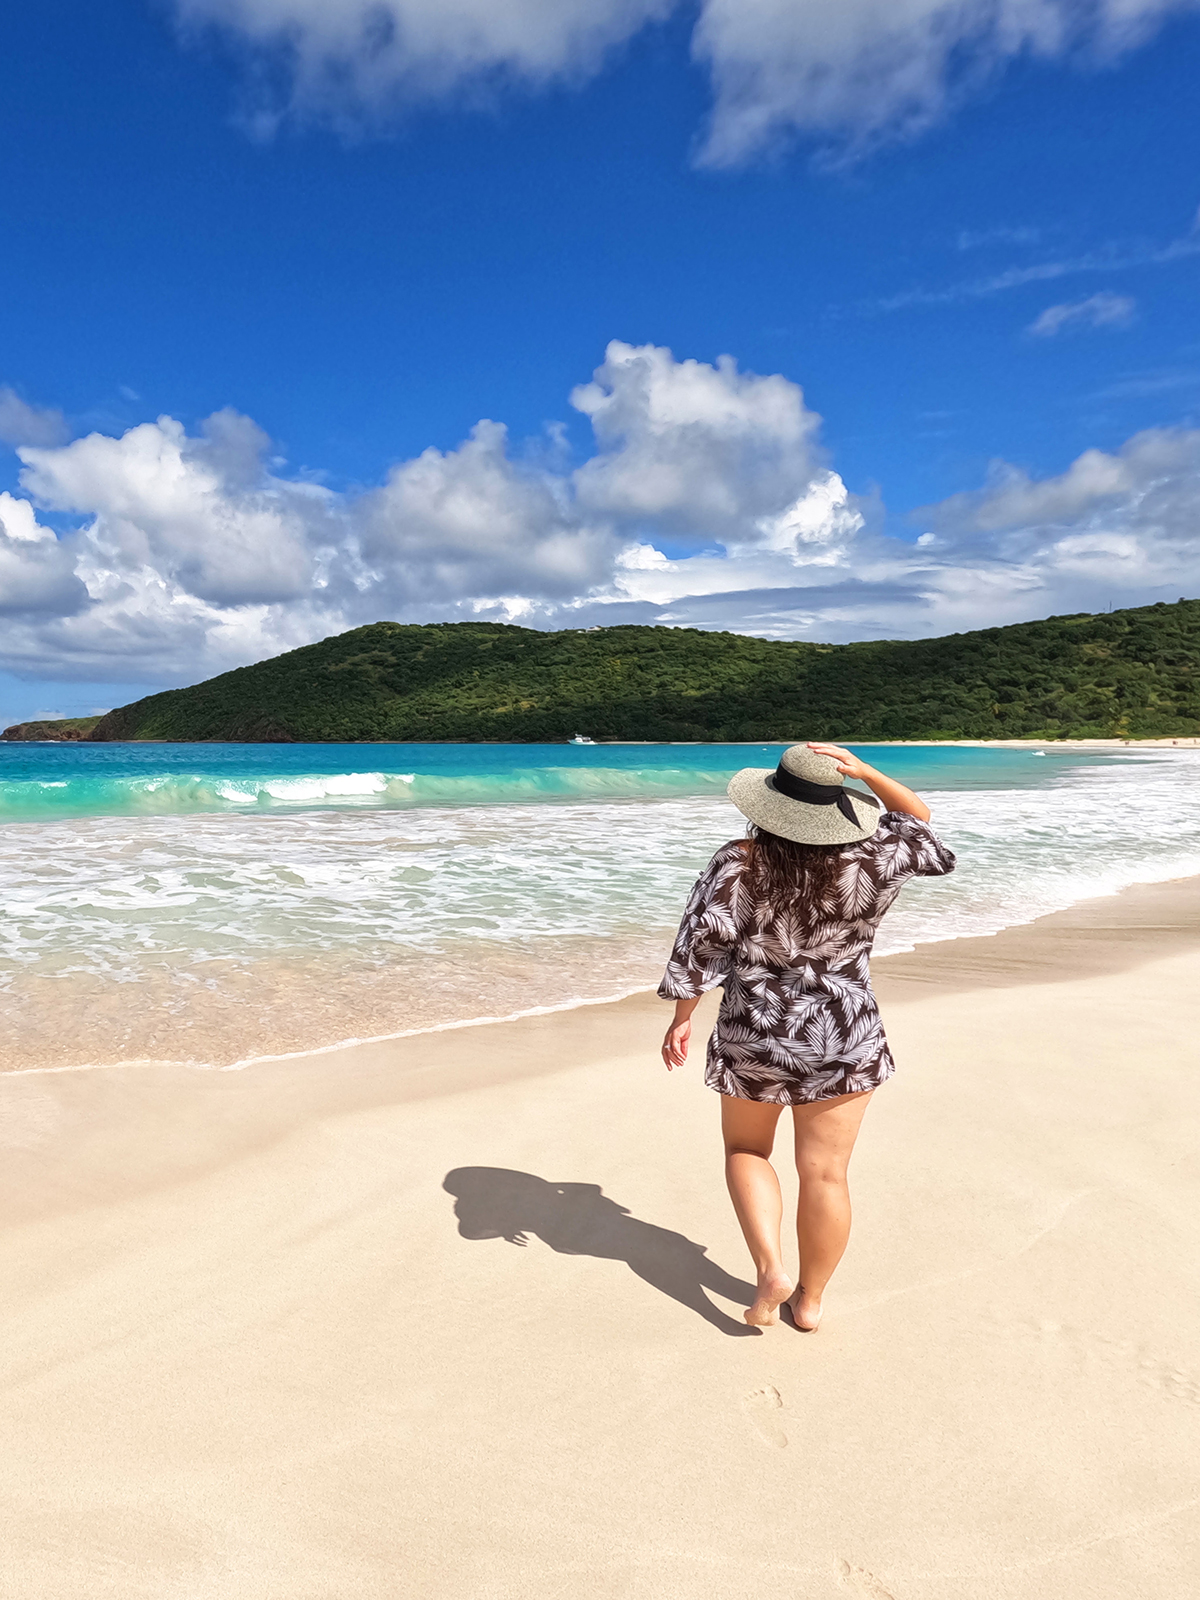 woman walking with hand on hat on white sand beach with blue water and hilly coastline in distance on Culebra